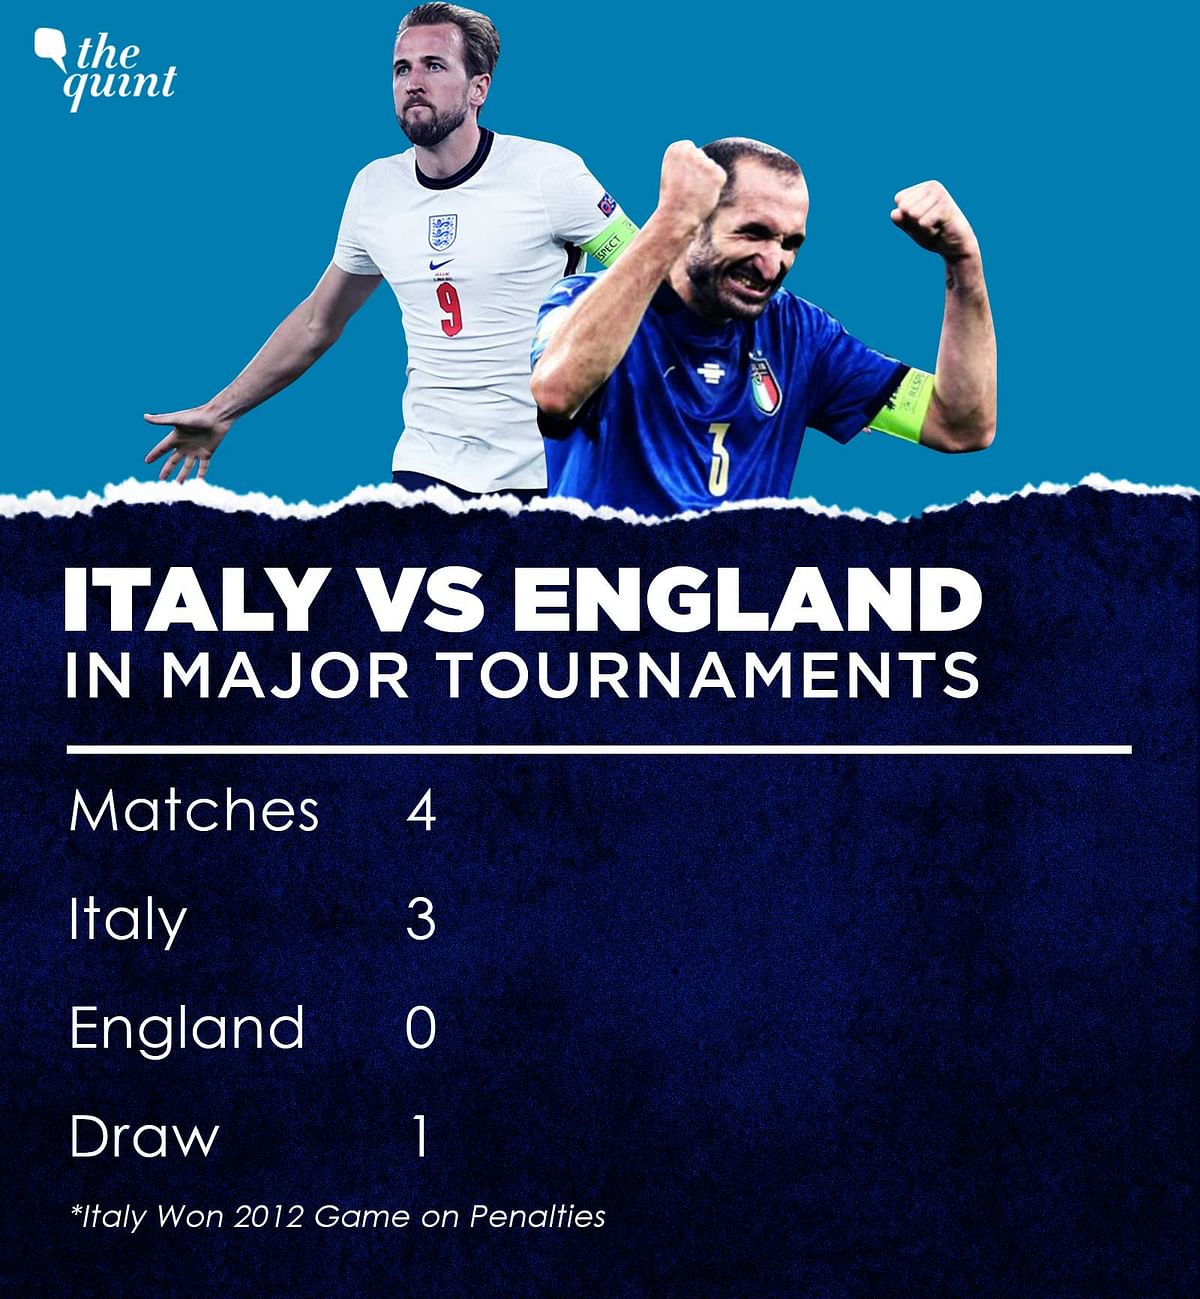 Italy have not lost in 33 consecutive games, while England have kept 10 clean sheets in a 12-match unbeaten streak. 